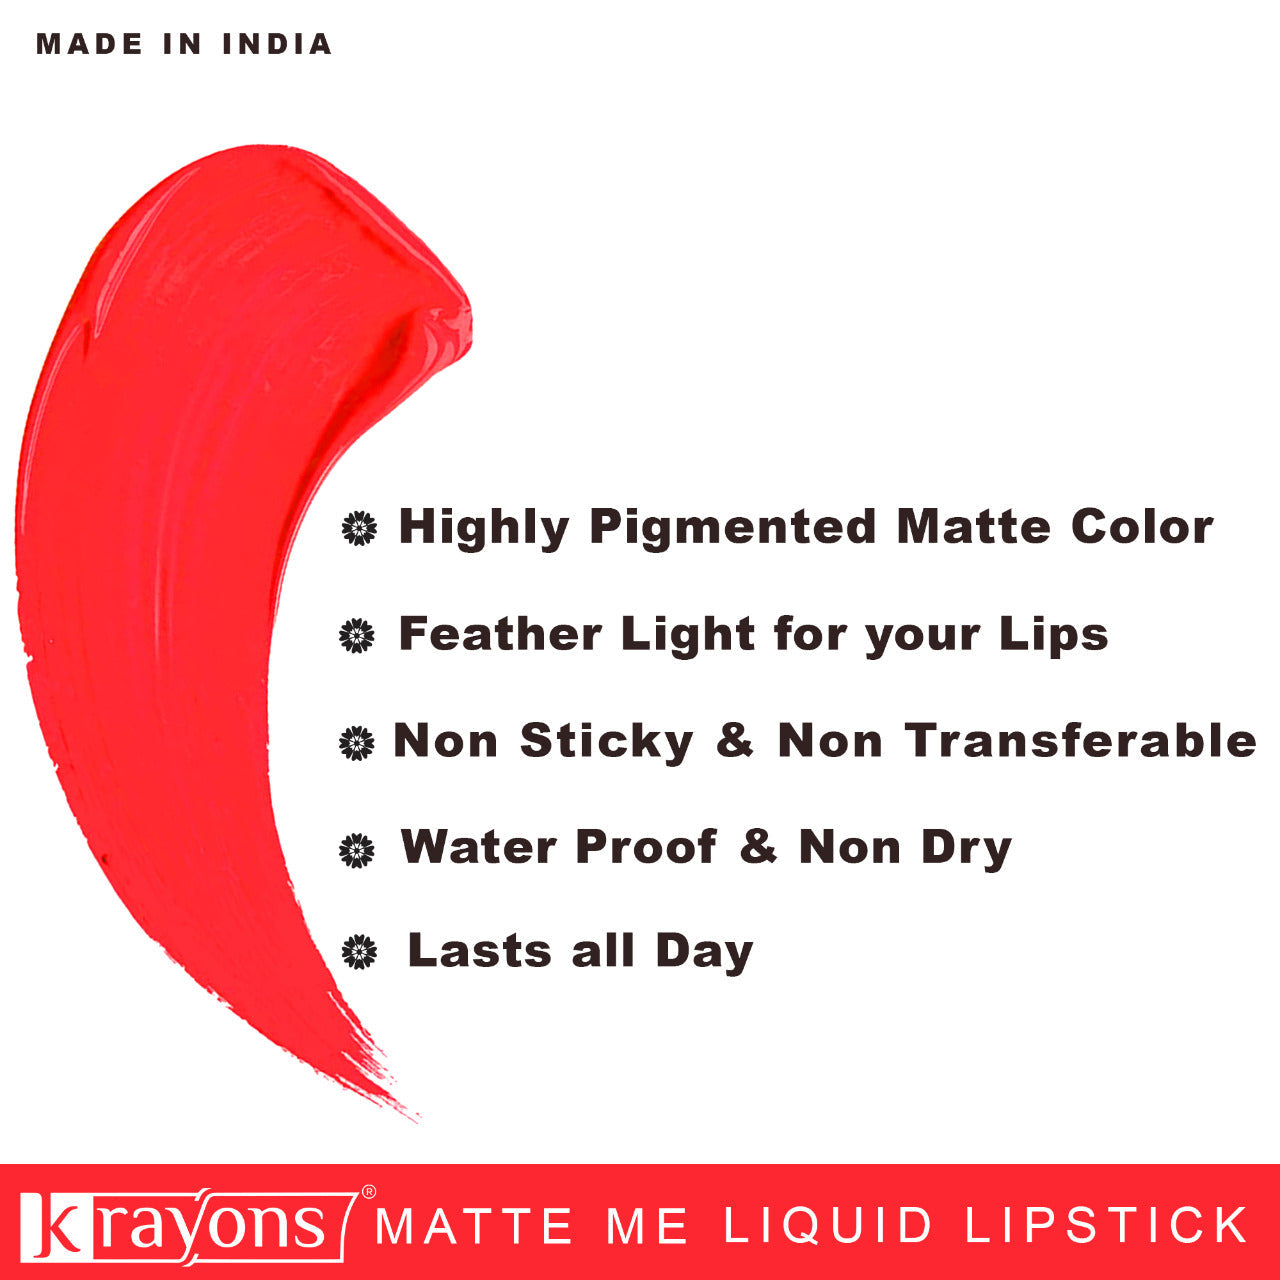 Krayons Matte Me Ultra Smooth Matte Liquid Lip Color, Mask Proof, Waterproof, Longlasting, 5ml Each, Combo, Pack of 3 (Sunset Orange, Pink Fever, Coffee Creme)